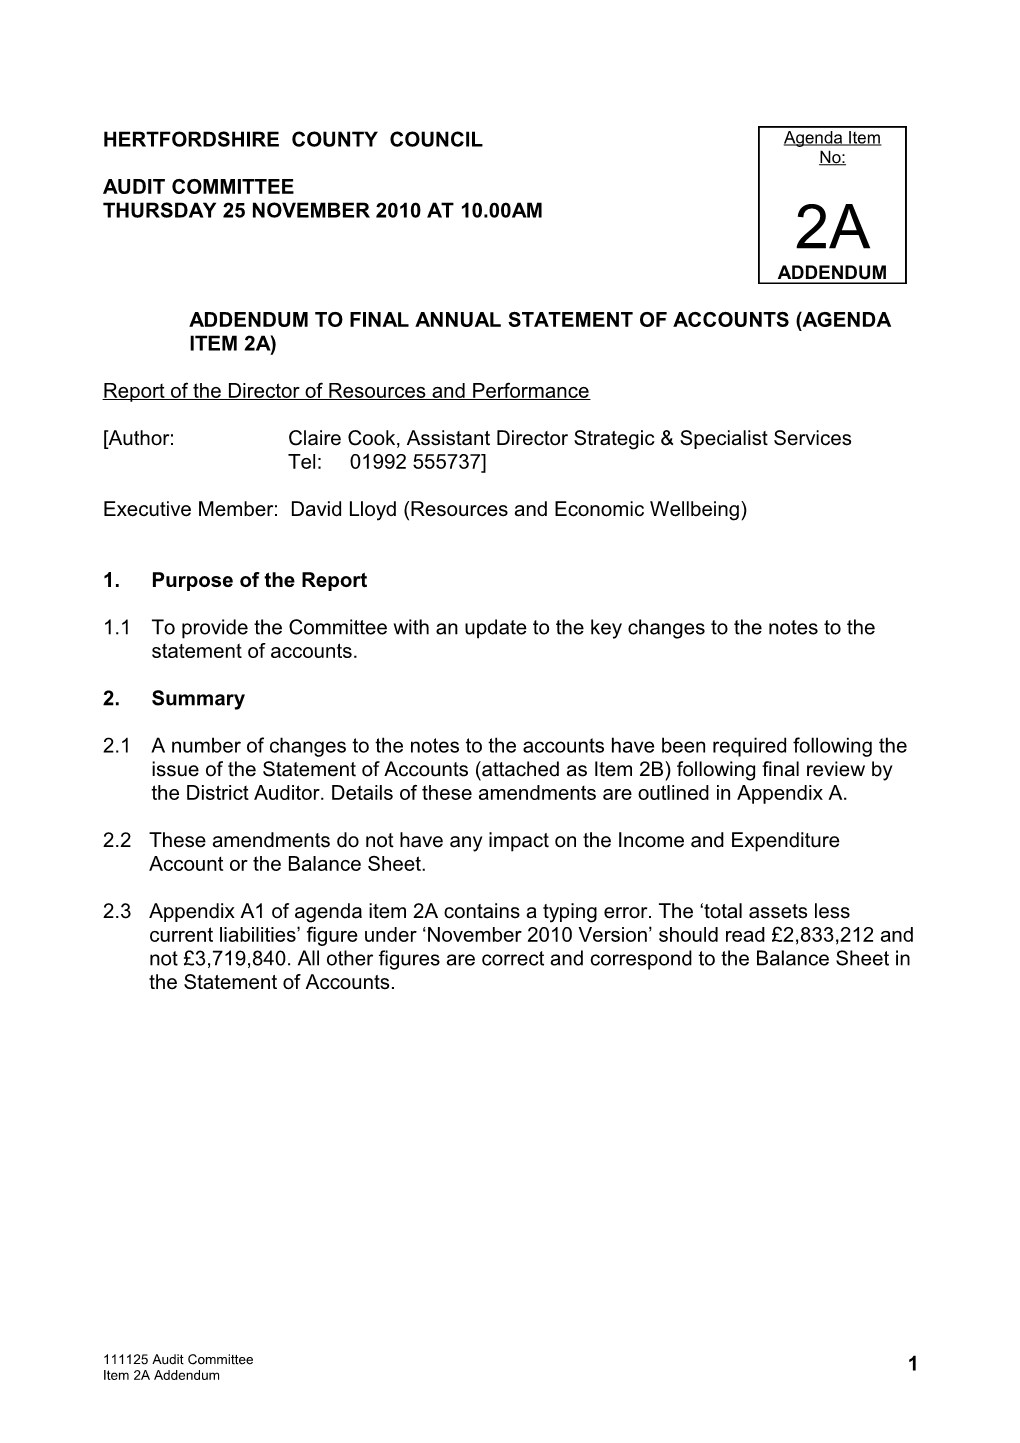 Audit Committee Thursday 25 November 2010 at 10.00Am Addedndum to Item 2A - Final Annual